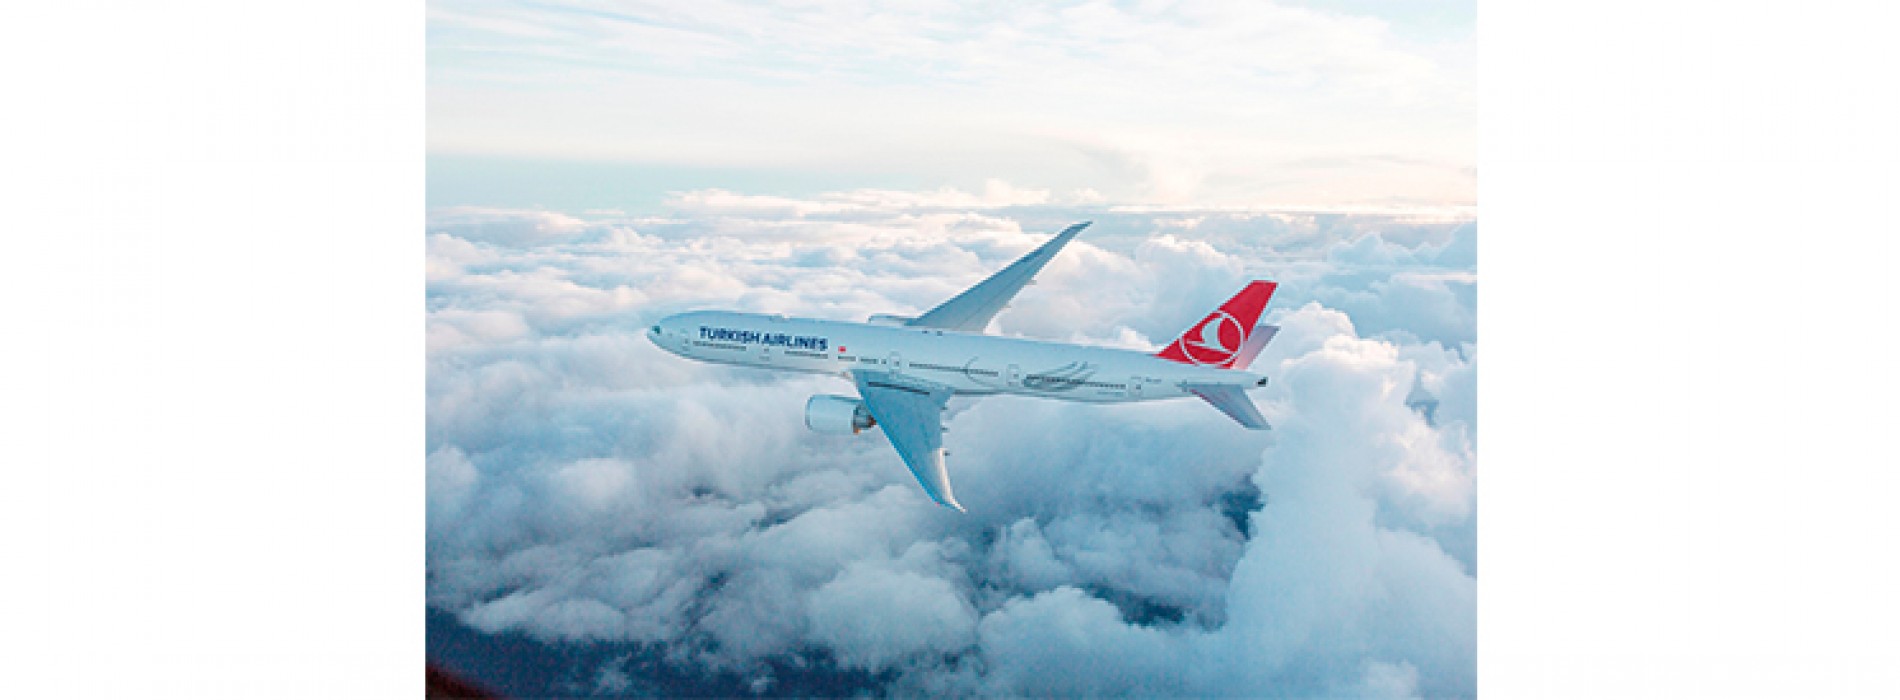 Turkish Airlines ensures the absolute customer satisfaction by delivering personalized experiences to its global travelers.